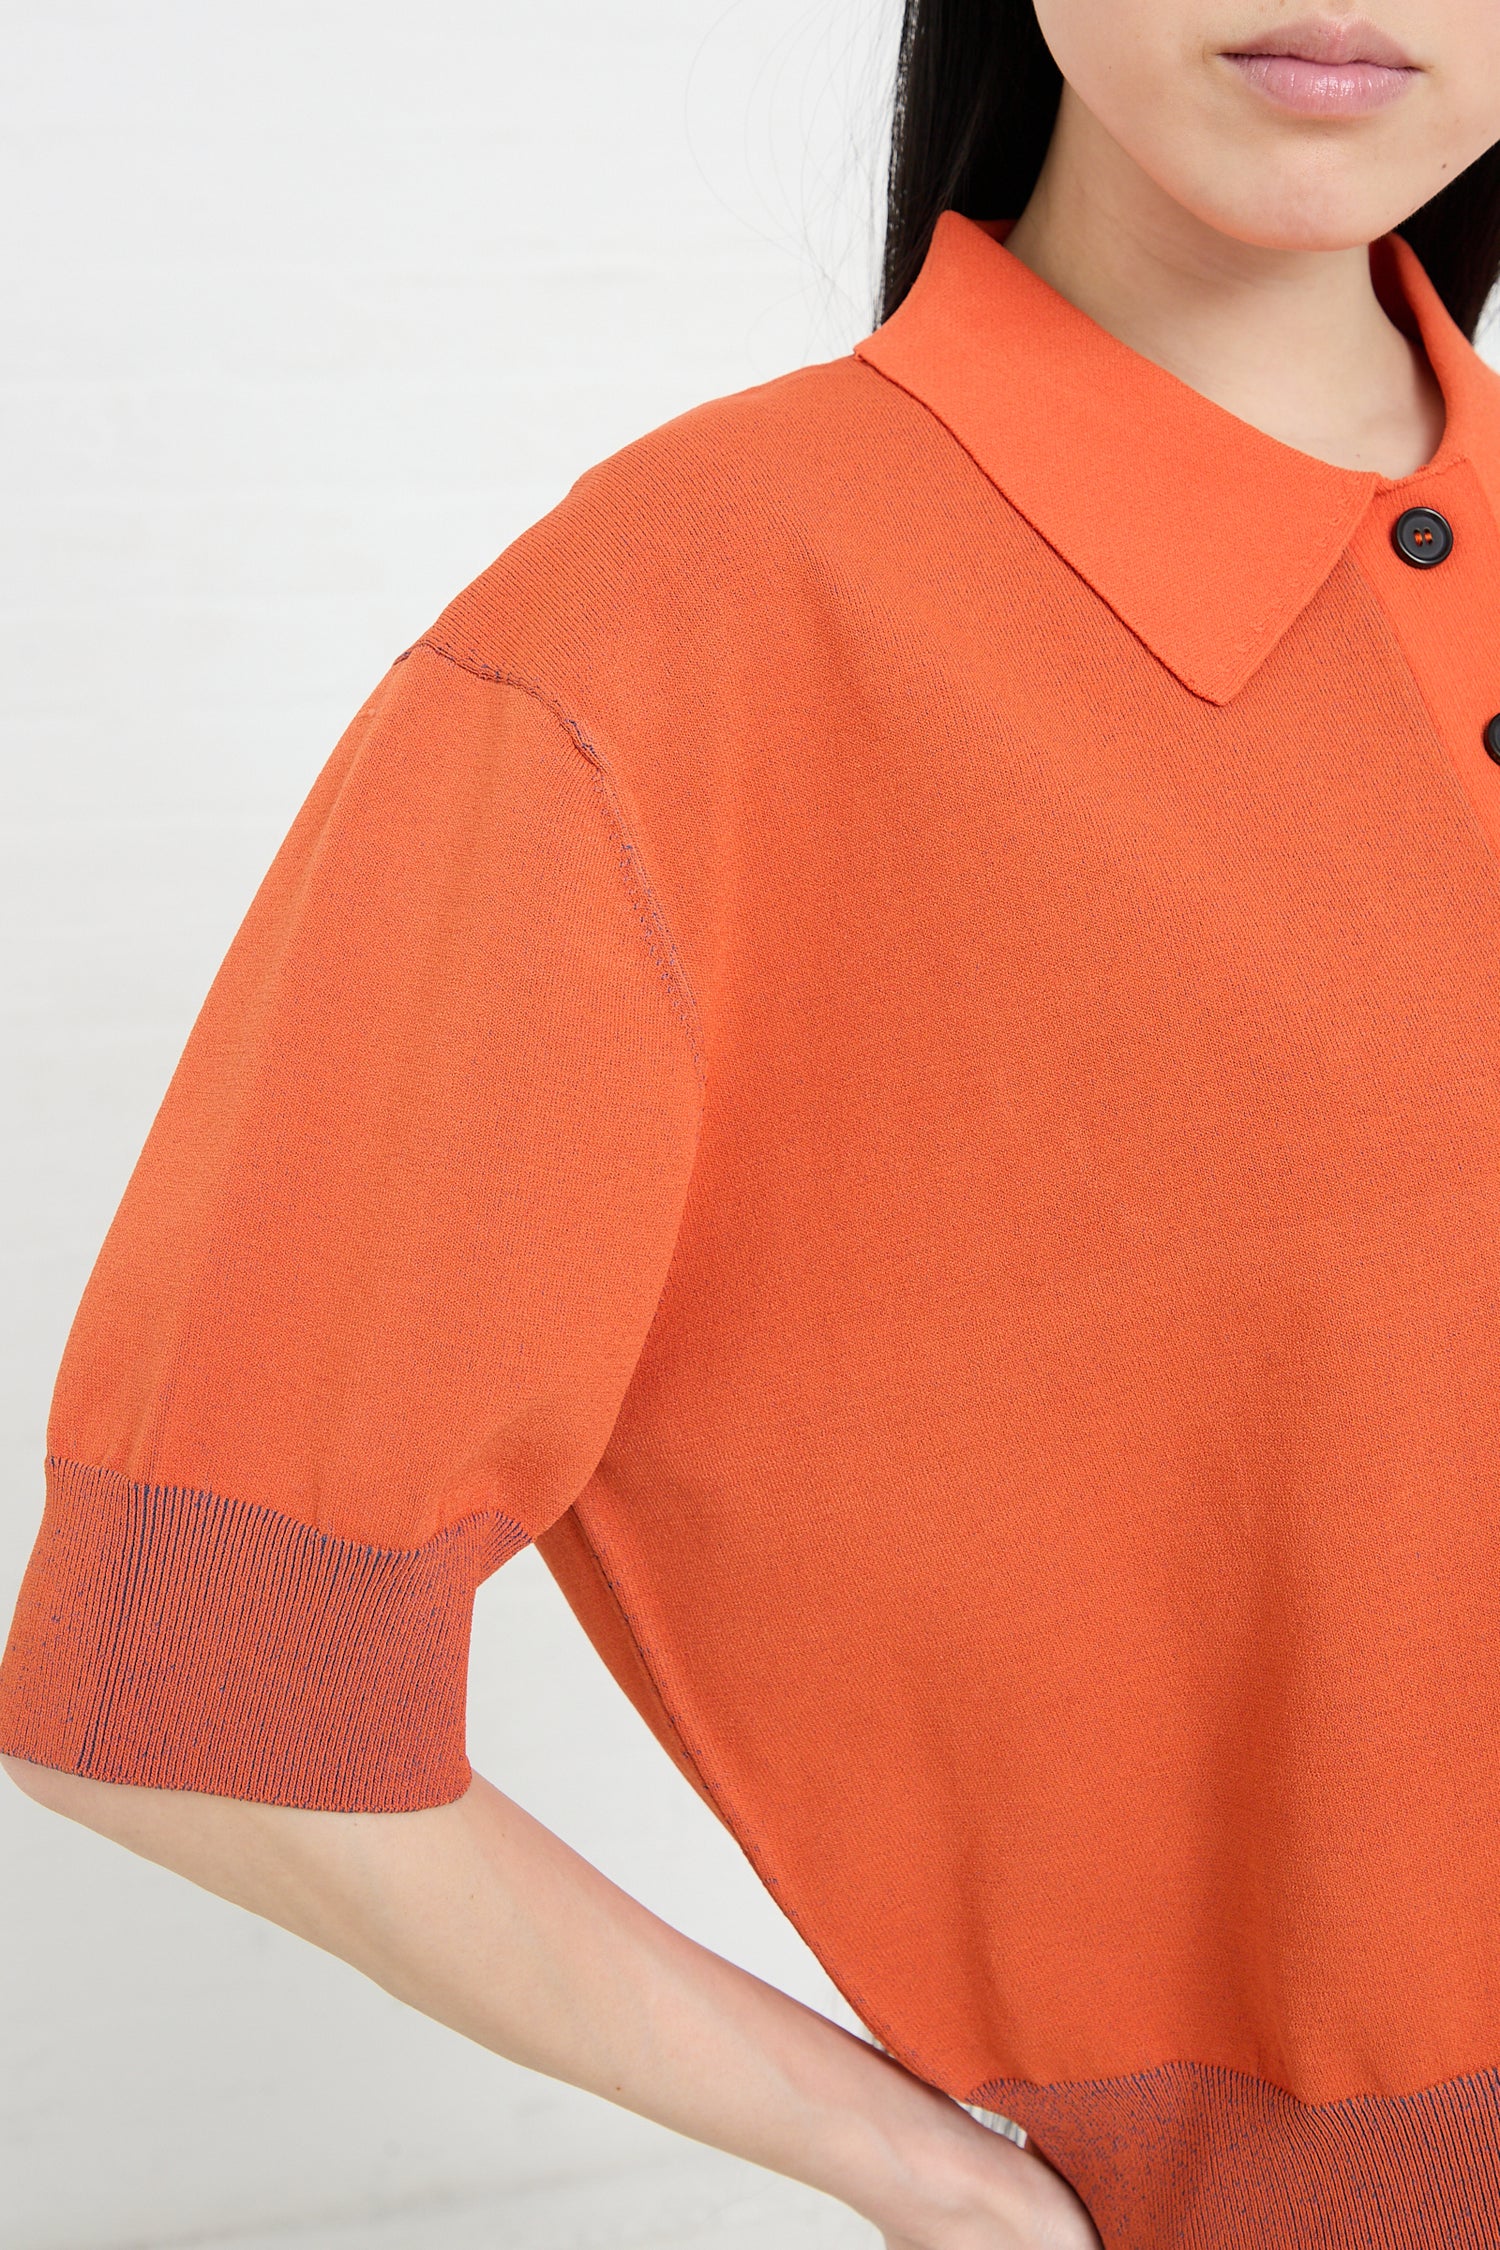 Woman wearing a Rachel Comey Omin Top in Orange, designed in crepe knit and featuring a collar and cuffed sleeves.